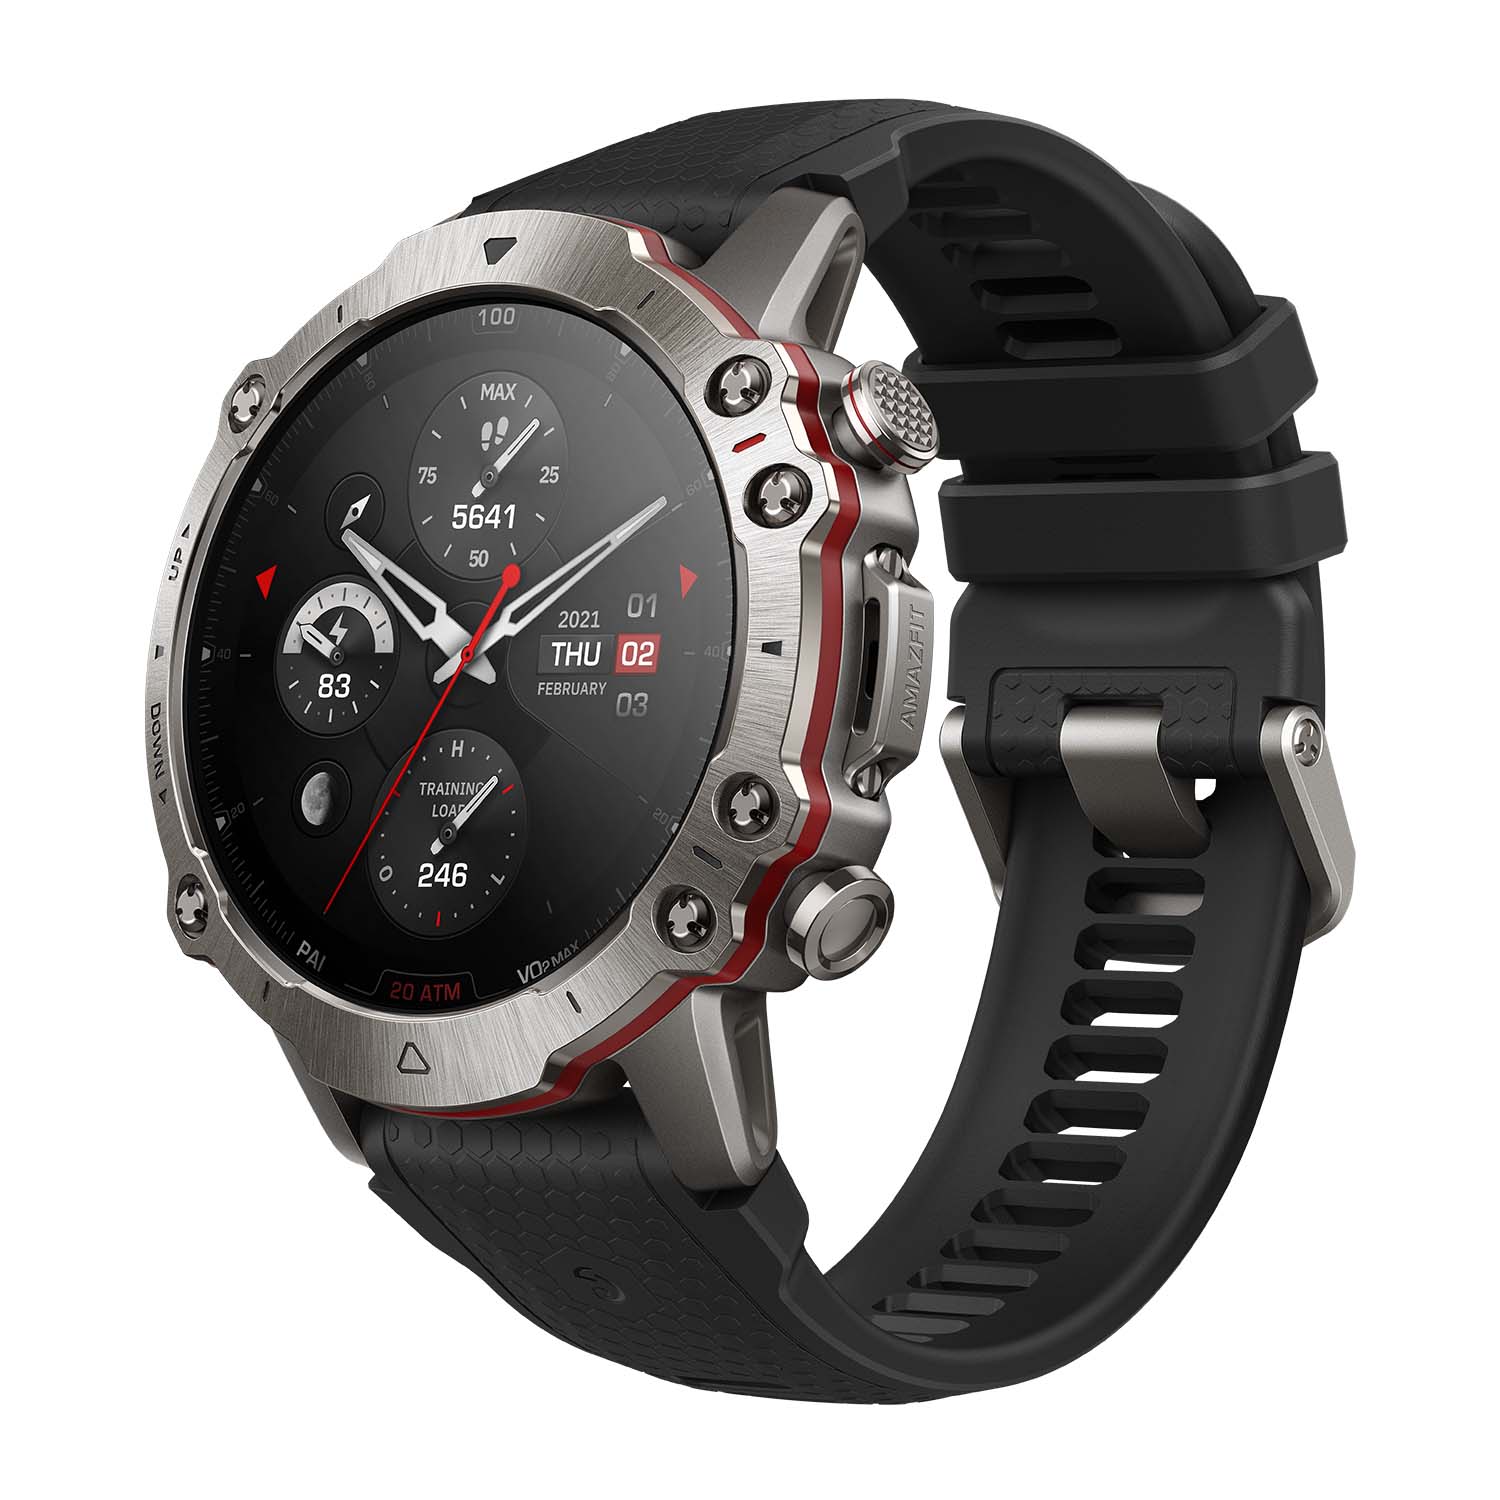 Amazfit Falcon Premium Military Smart Watch, Offline Map Support, Titanium Body, 14 Days Battery Life, Dual-Band & 6 Satellite Positioning, Strength